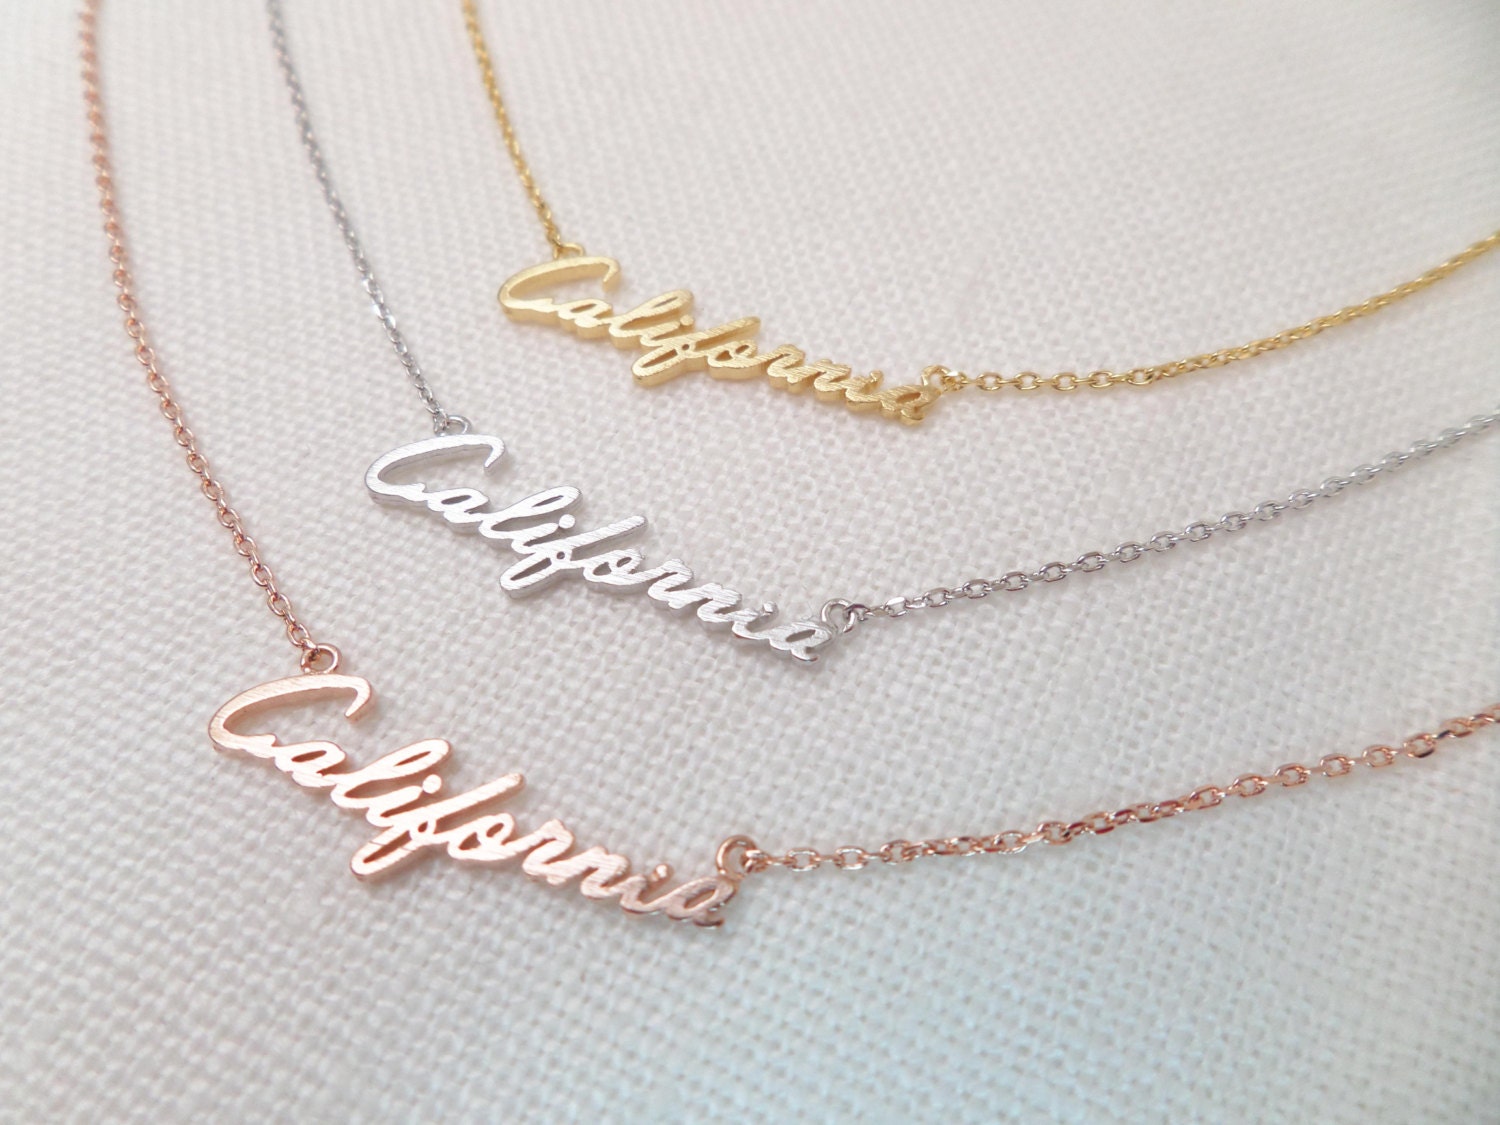 California State Pendant Necklace - Fame Accessories